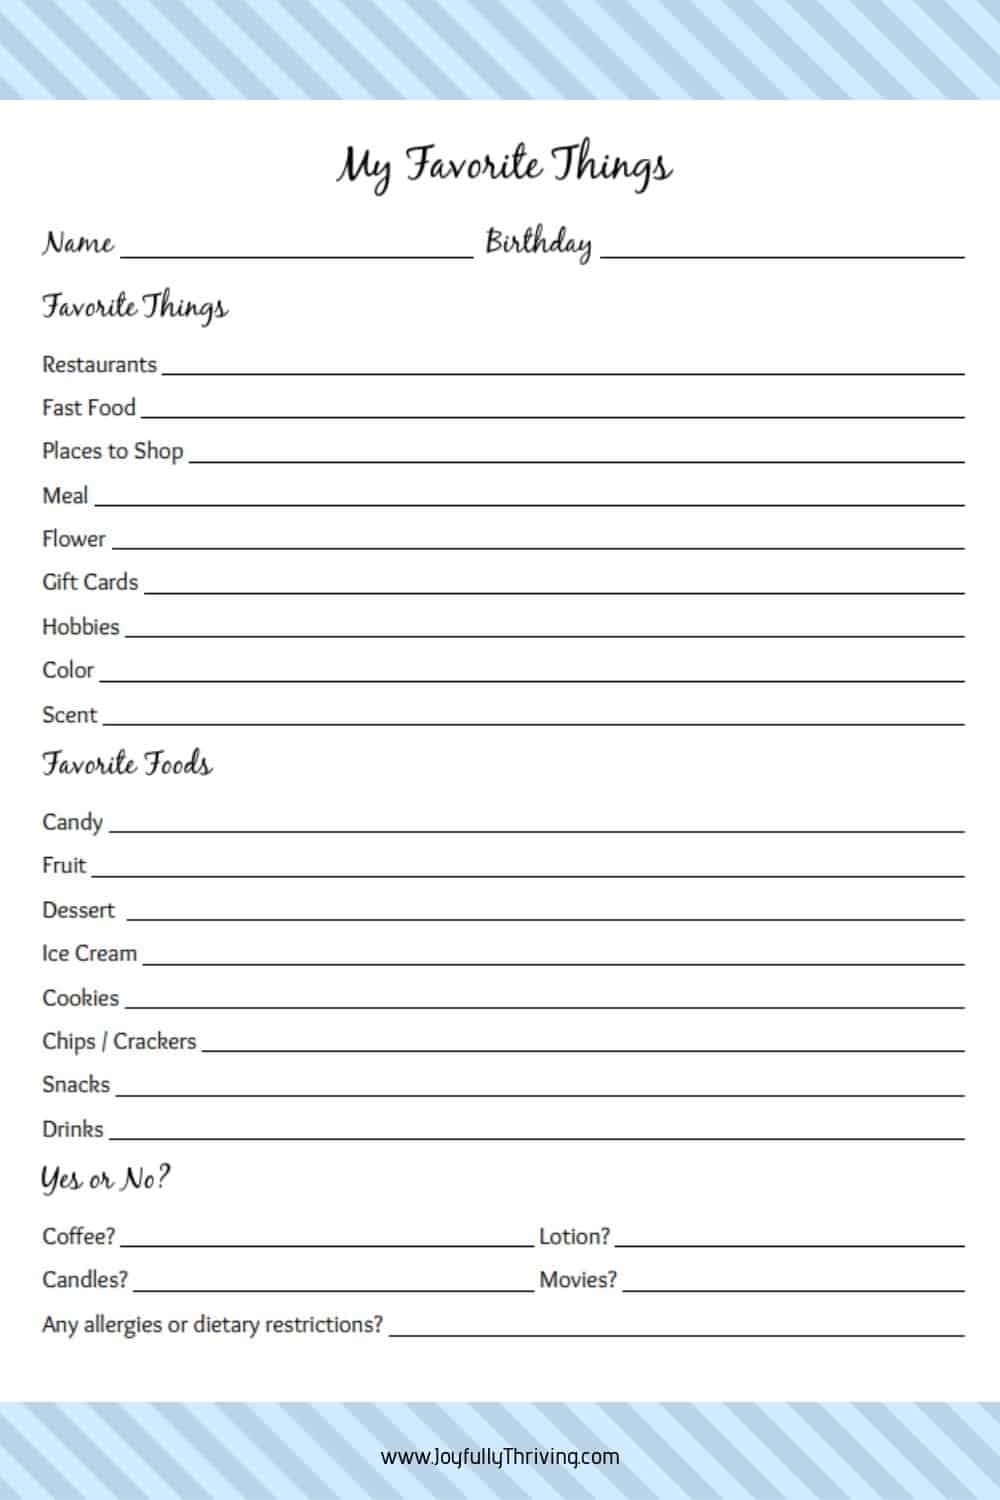 My Favorite Things List Free Printable Gift Ideas For 